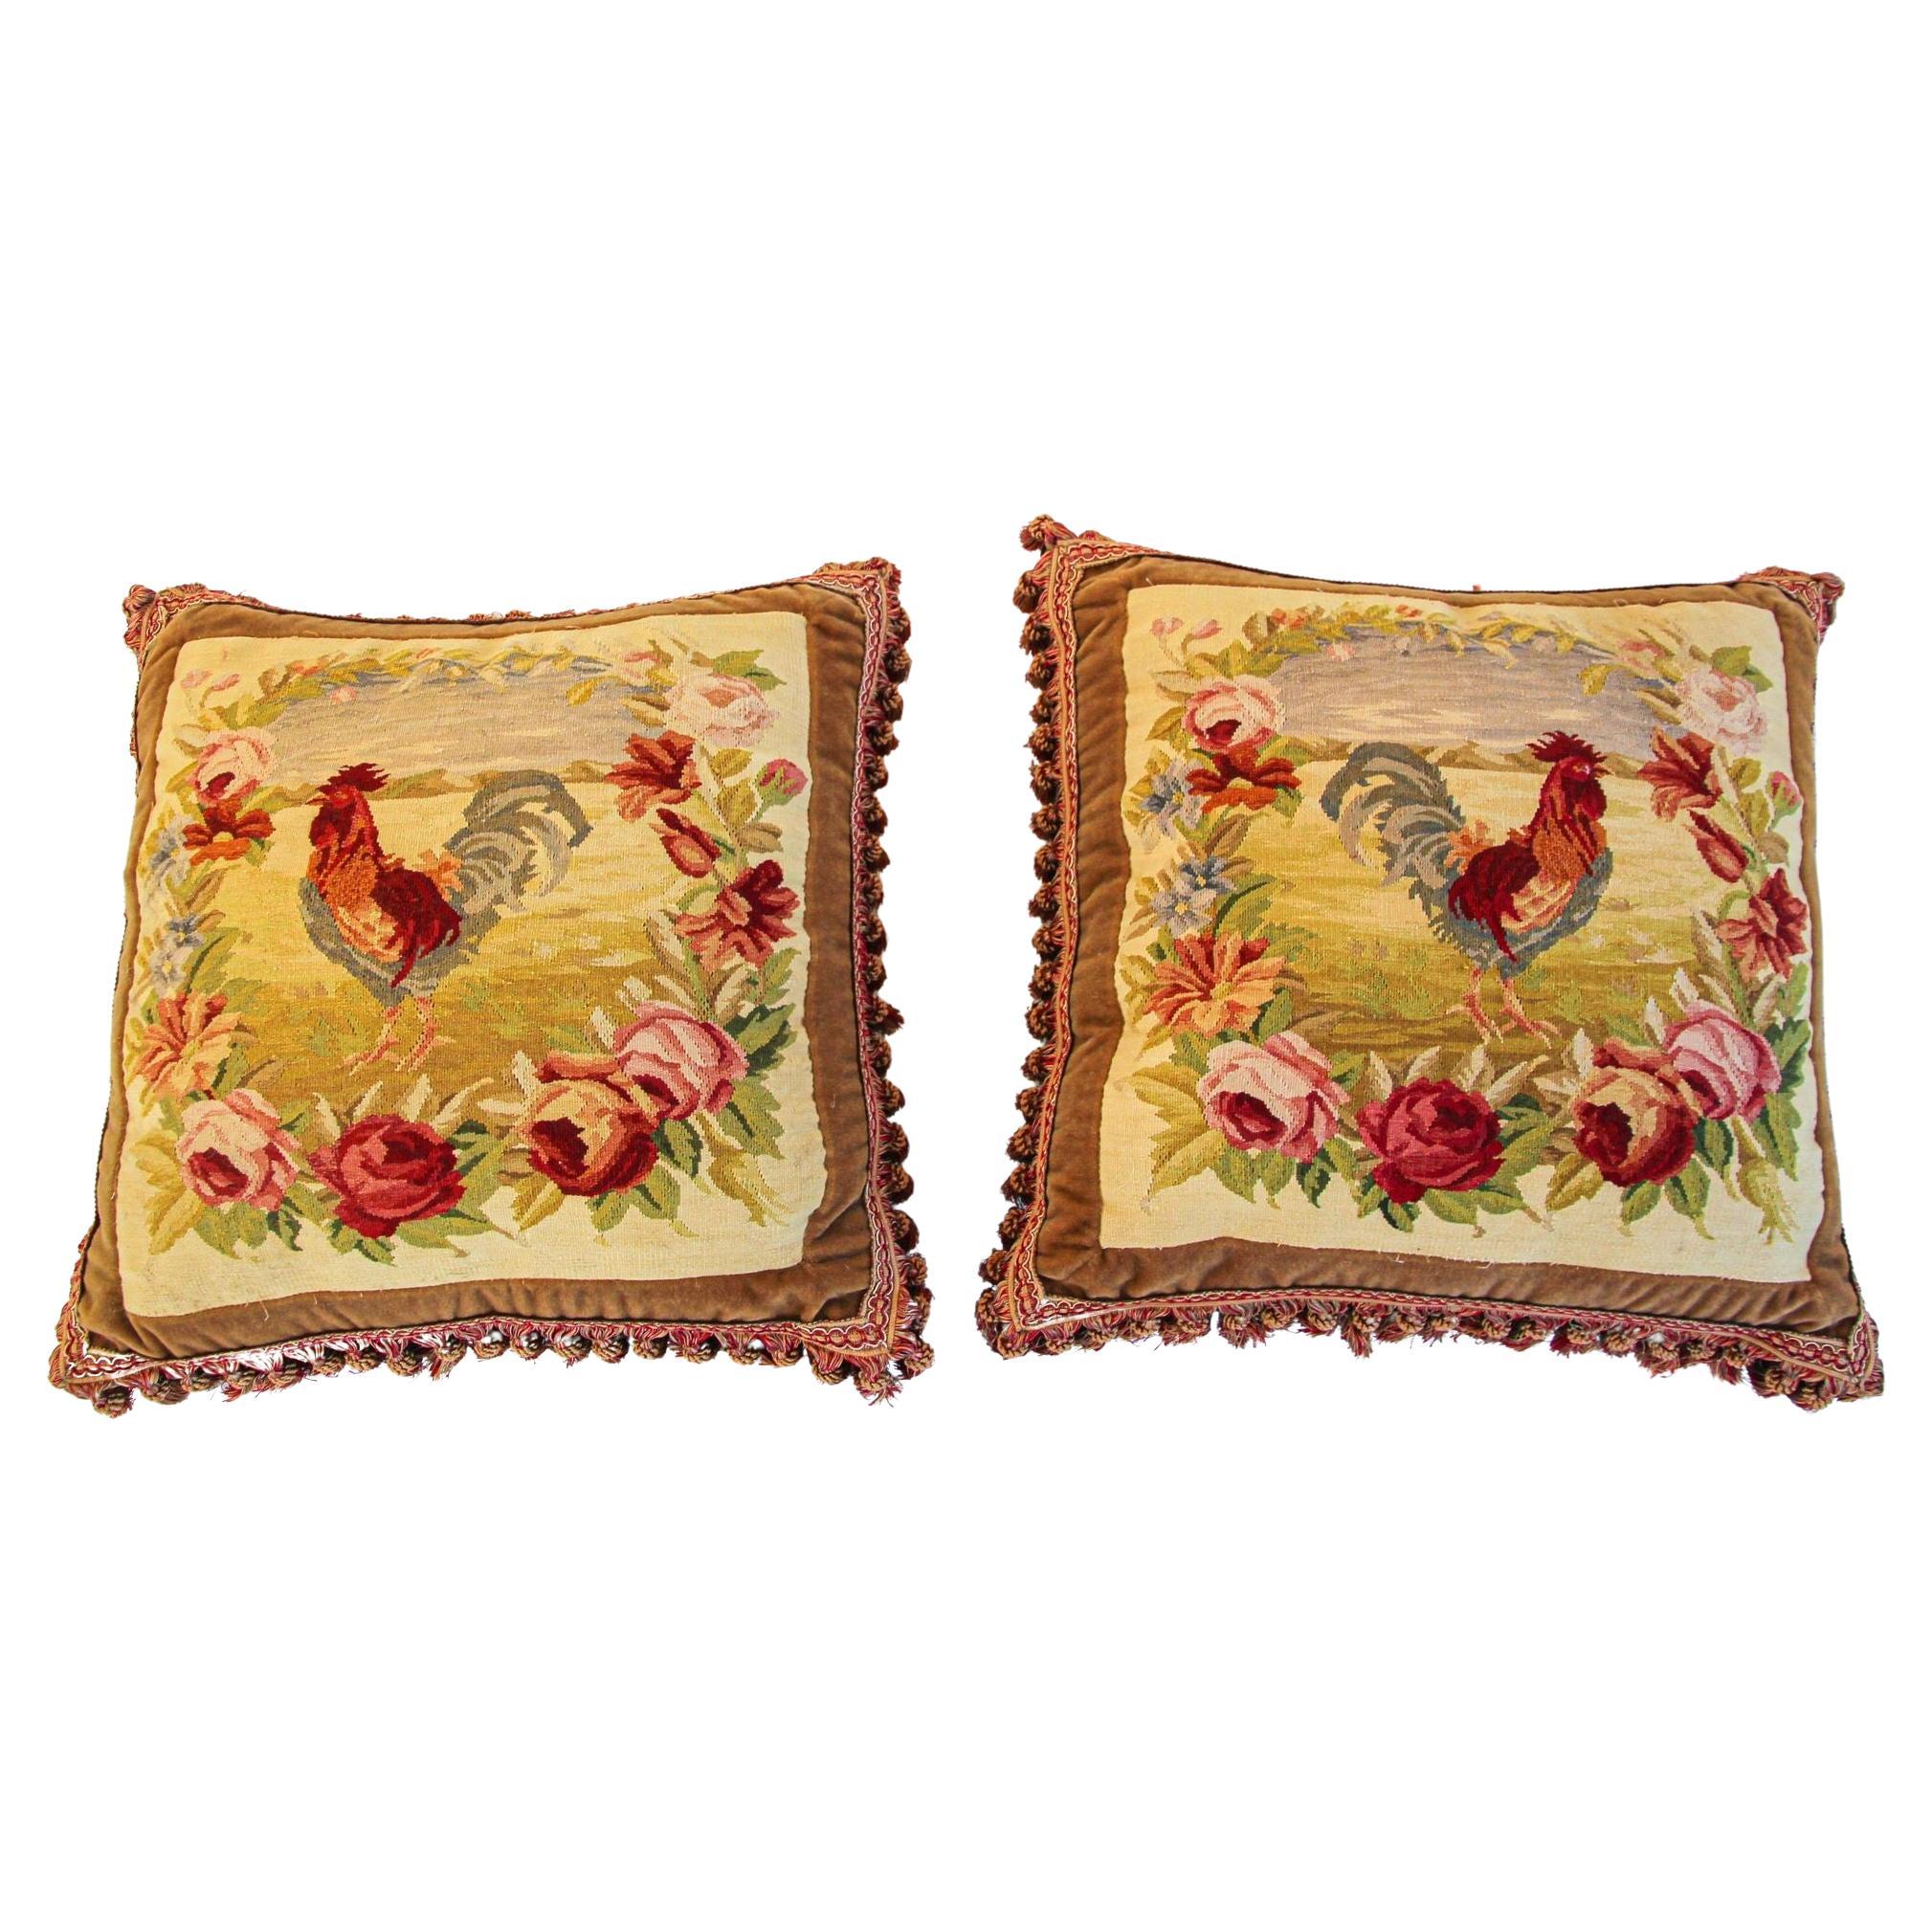 Antique Aubusson Tapestry Pillows with Rooster and Roses French Provincial